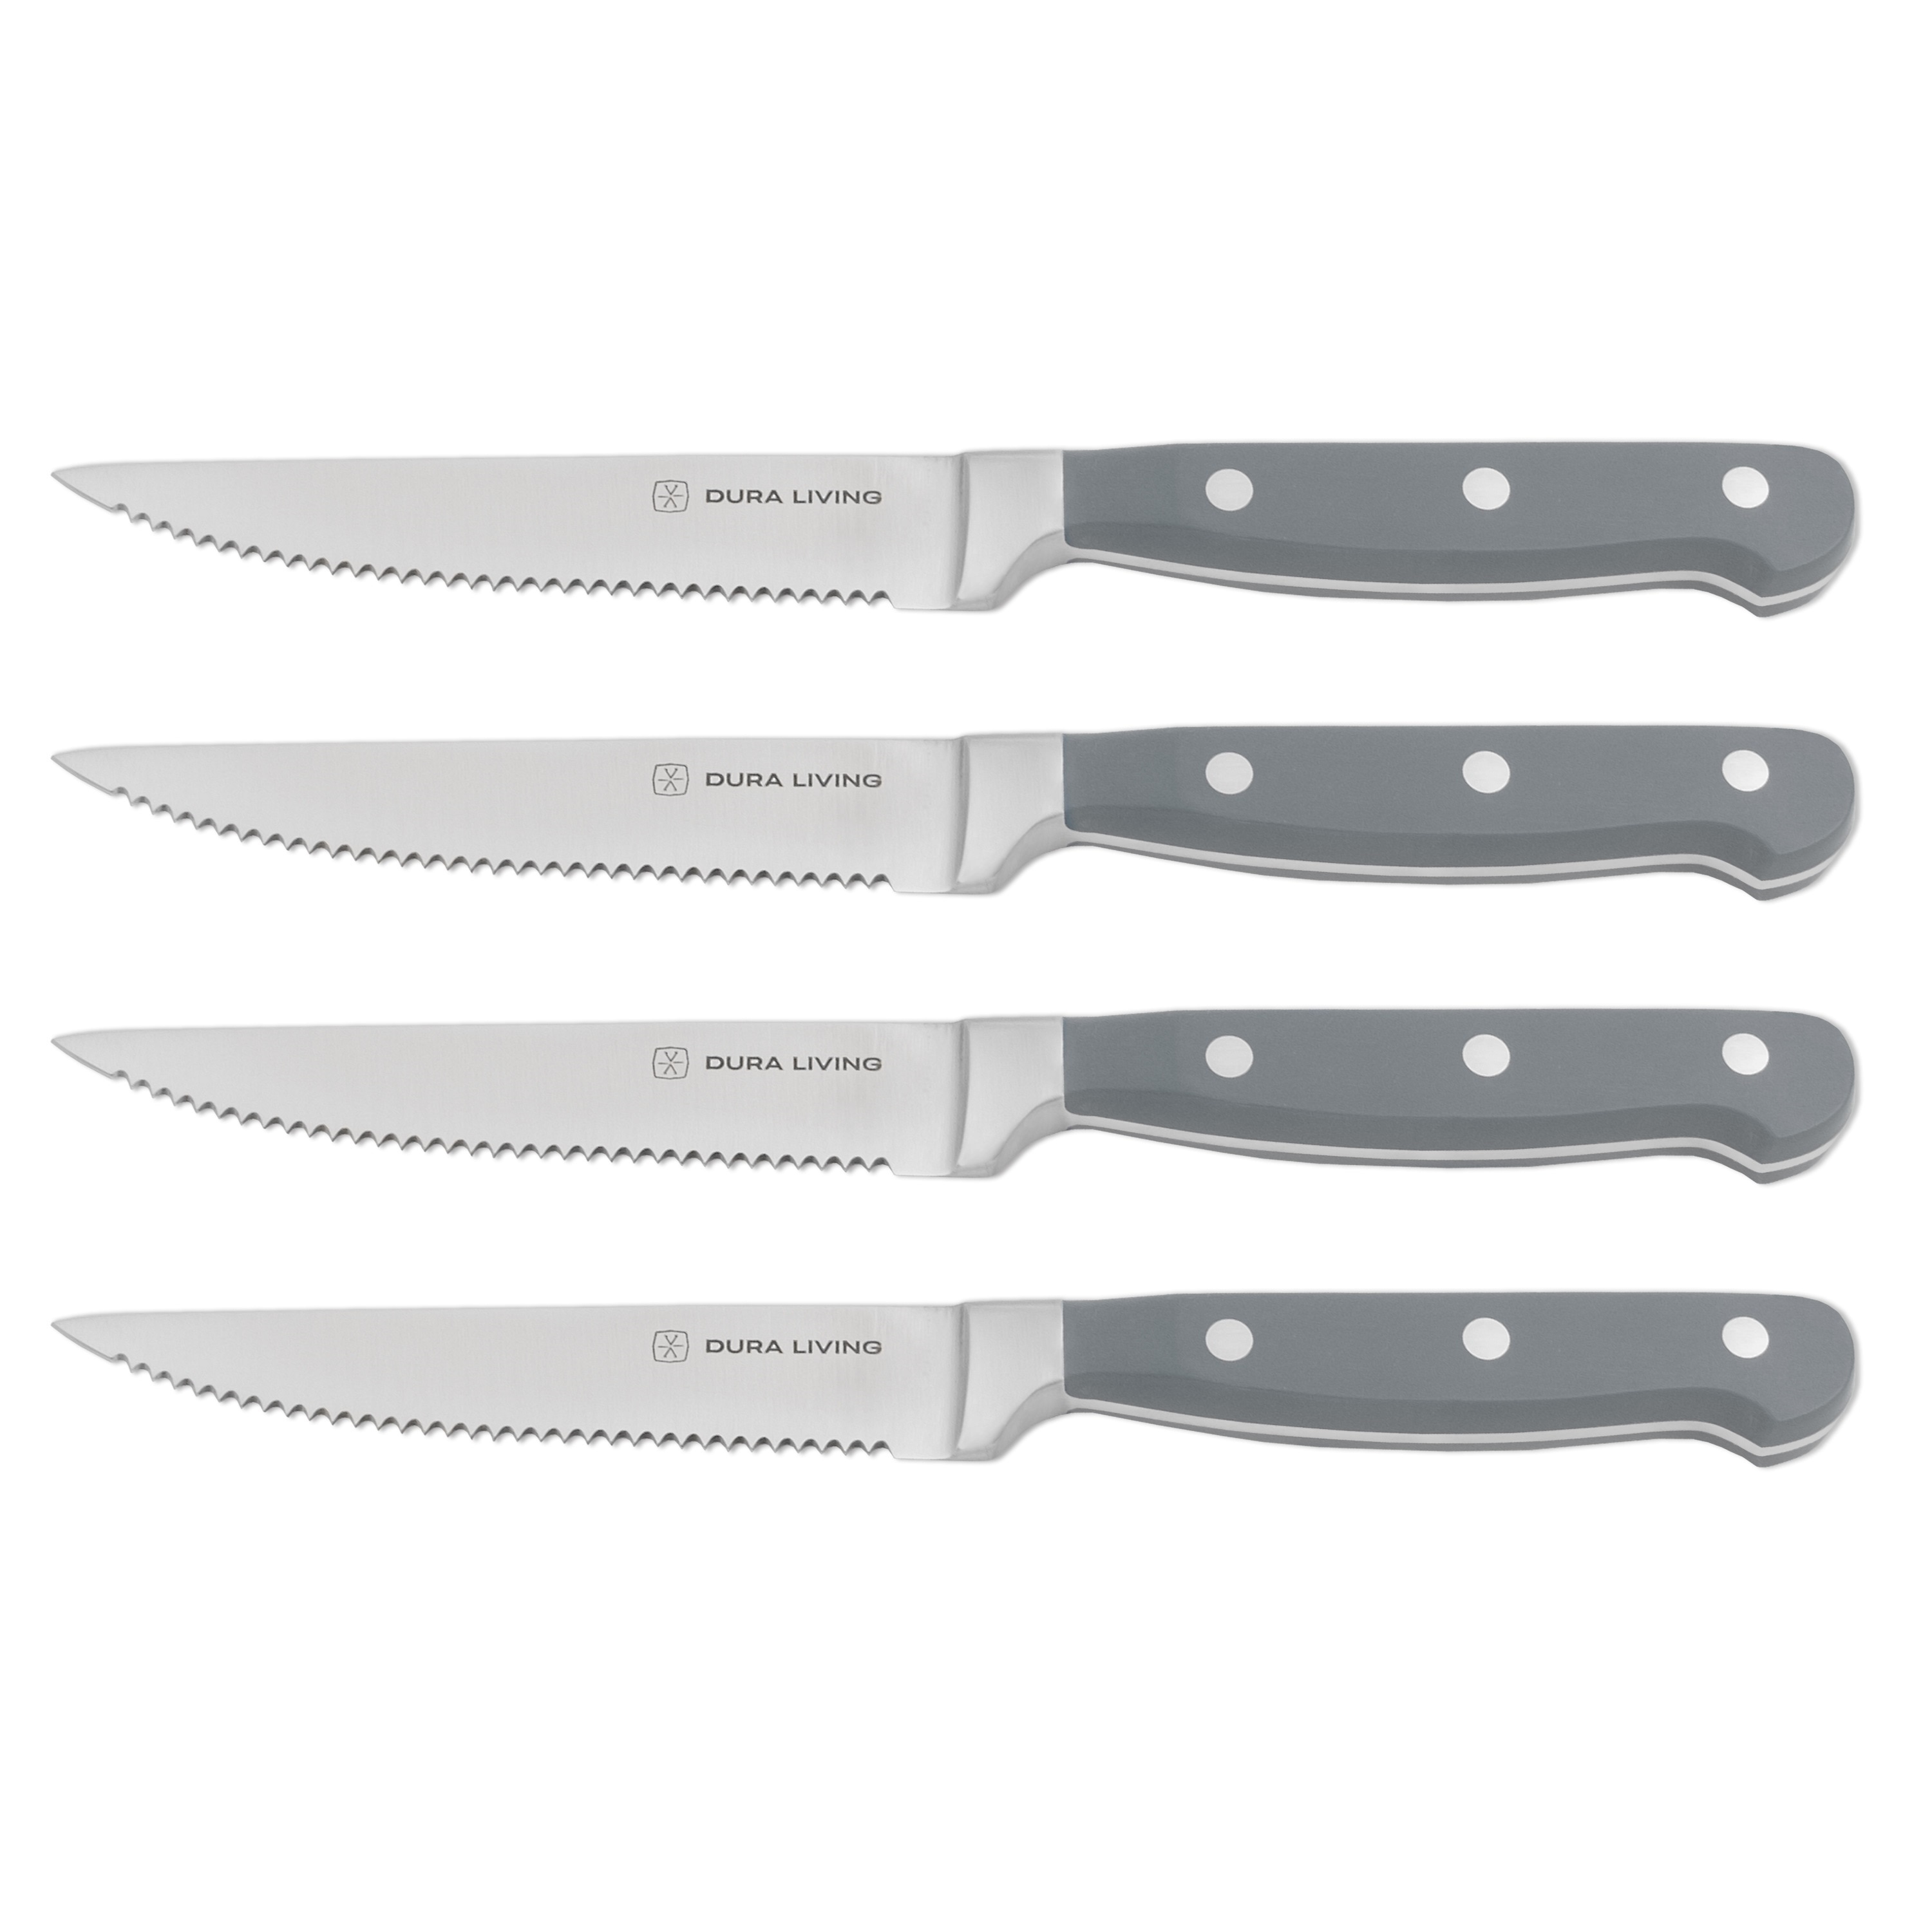 https://ak1.ostkcdn.com/images/products/is/images/direct/0ee5ec90f780932bc67f20d8d3f846bb205355fe/Dura-Living-Superior-Steak-Knife-Set-of-4---Forged-Stainless-Steel-Serrated-Blades%2C-Black.jpg